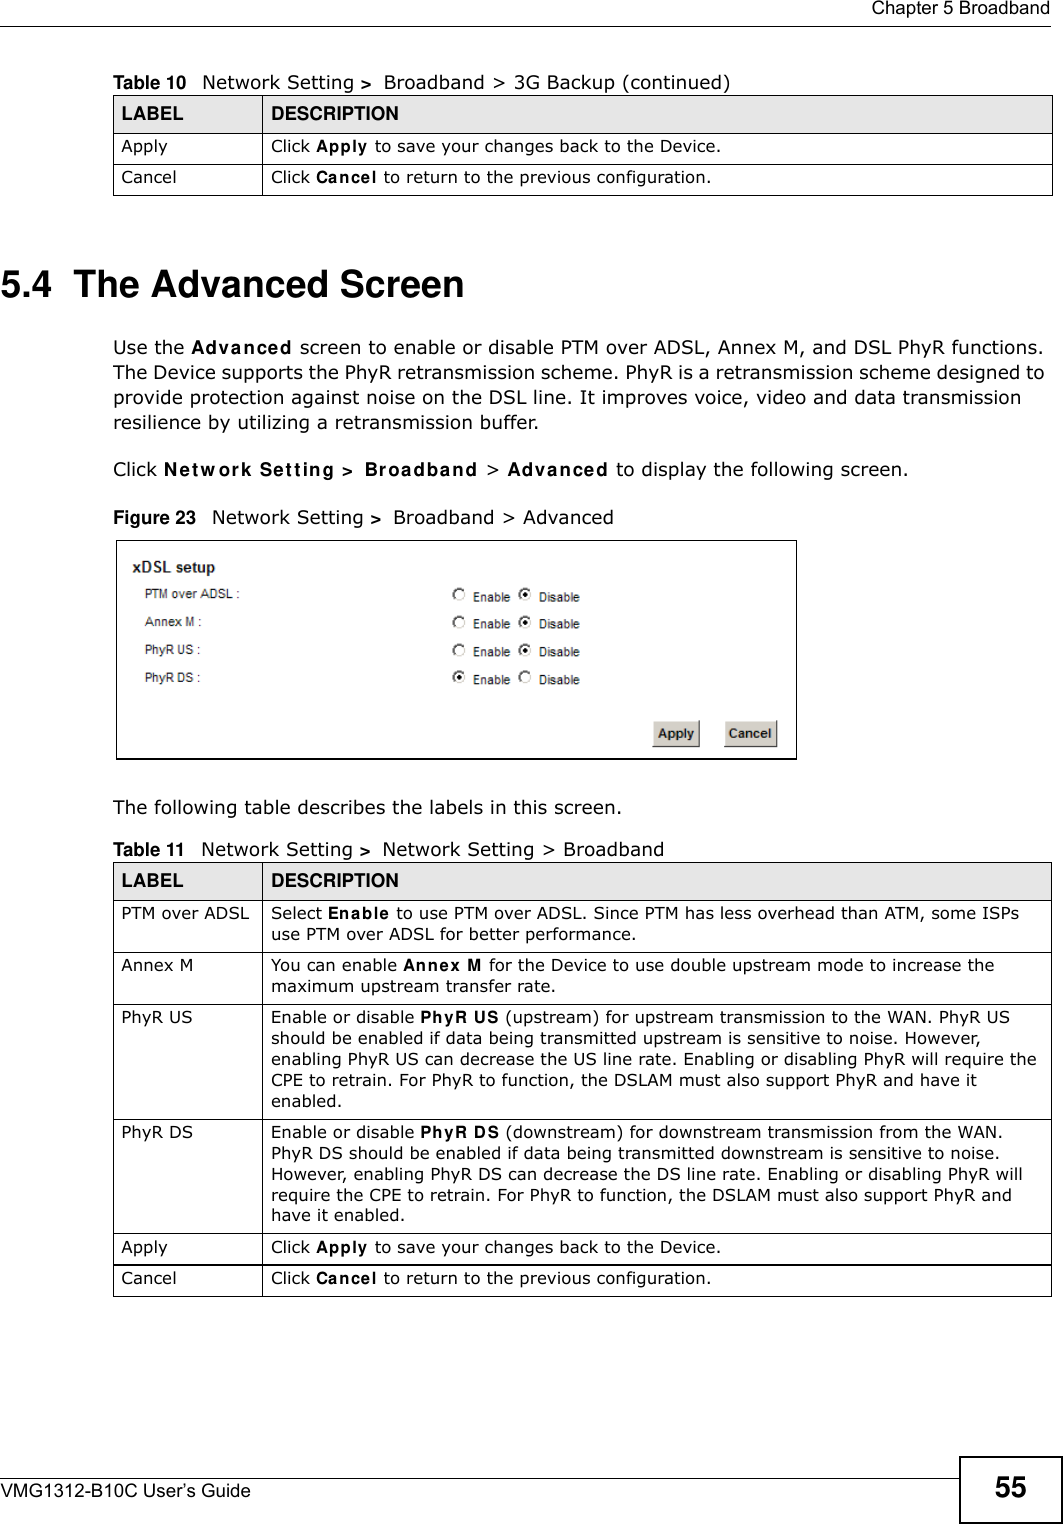  Chapter 5 BroadbandVMG1312-B10C User’s Guide 555.4  The Advanced ScreenUse the Adv a nced screen to enable or disable PTM over ADSL, Annex M, and DSL PhyR functions. The Device supports the PhyR retransmission scheme. PhyR is a retransmission scheme designed to provide protection against noise on the DSL line. It improves voice, video and data transmission resilience by utilizing a retransmission buffer.Click N et w or k  Se t t ing &gt;  Br oa dband &gt; Adva n ced to display the following screen.Figure 23   Network Setting &gt;  Broadband &gt; Advanced The following table describes the labels in this screen. Apply Click Apply to save your changes back to the Device.Cancel Click Cancel to return to the previous configuration.Table 10   Network Setting &gt;  Broadband &gt; 3G Backup (continued)LABEL DESCRIPTIONTable 11   Network Setting &gt;  Network Setting &gt; BroadbandLABEL DESCRIPTIONPTM over ADSL Select En able  to use PTM over ADSL. Since PTM has less overhead than ATM, some ISPs use PTM over ADSL for better performance.Annex M You can enable Ann ex M  for the Device to use double upstream mode to increase the maximum upstream transfer rate.PhyR US Enable or disable PhyR US (upstream) for upstream transmission to the WAN. PhyR US should be enabled if data being transmitted upstream is sensitive to noise. However, enabling PhyR US can decrease the US line rate. Enabling or disabling PhyR will require the CPE to retrain. For PhyR to function, the DSLAM must also support PhyR and have it enabled.PhyR DS Enable or disable Ph yR D S (downstream) for downstream transmission from the WAN. PhyR DS should be enabled if data being transmitted downstream is sensitive to noise. However, enabling PhyR DS can decrease the DS line rate. Enabling or disabling PhyR will require the CPE to retrain. For PhyR to function, the DSLAM must also support PhyR and have it enabled.Apply Click Apply to save your changes back to the Device.Cancel Click Cancel to return to the previous configuration.